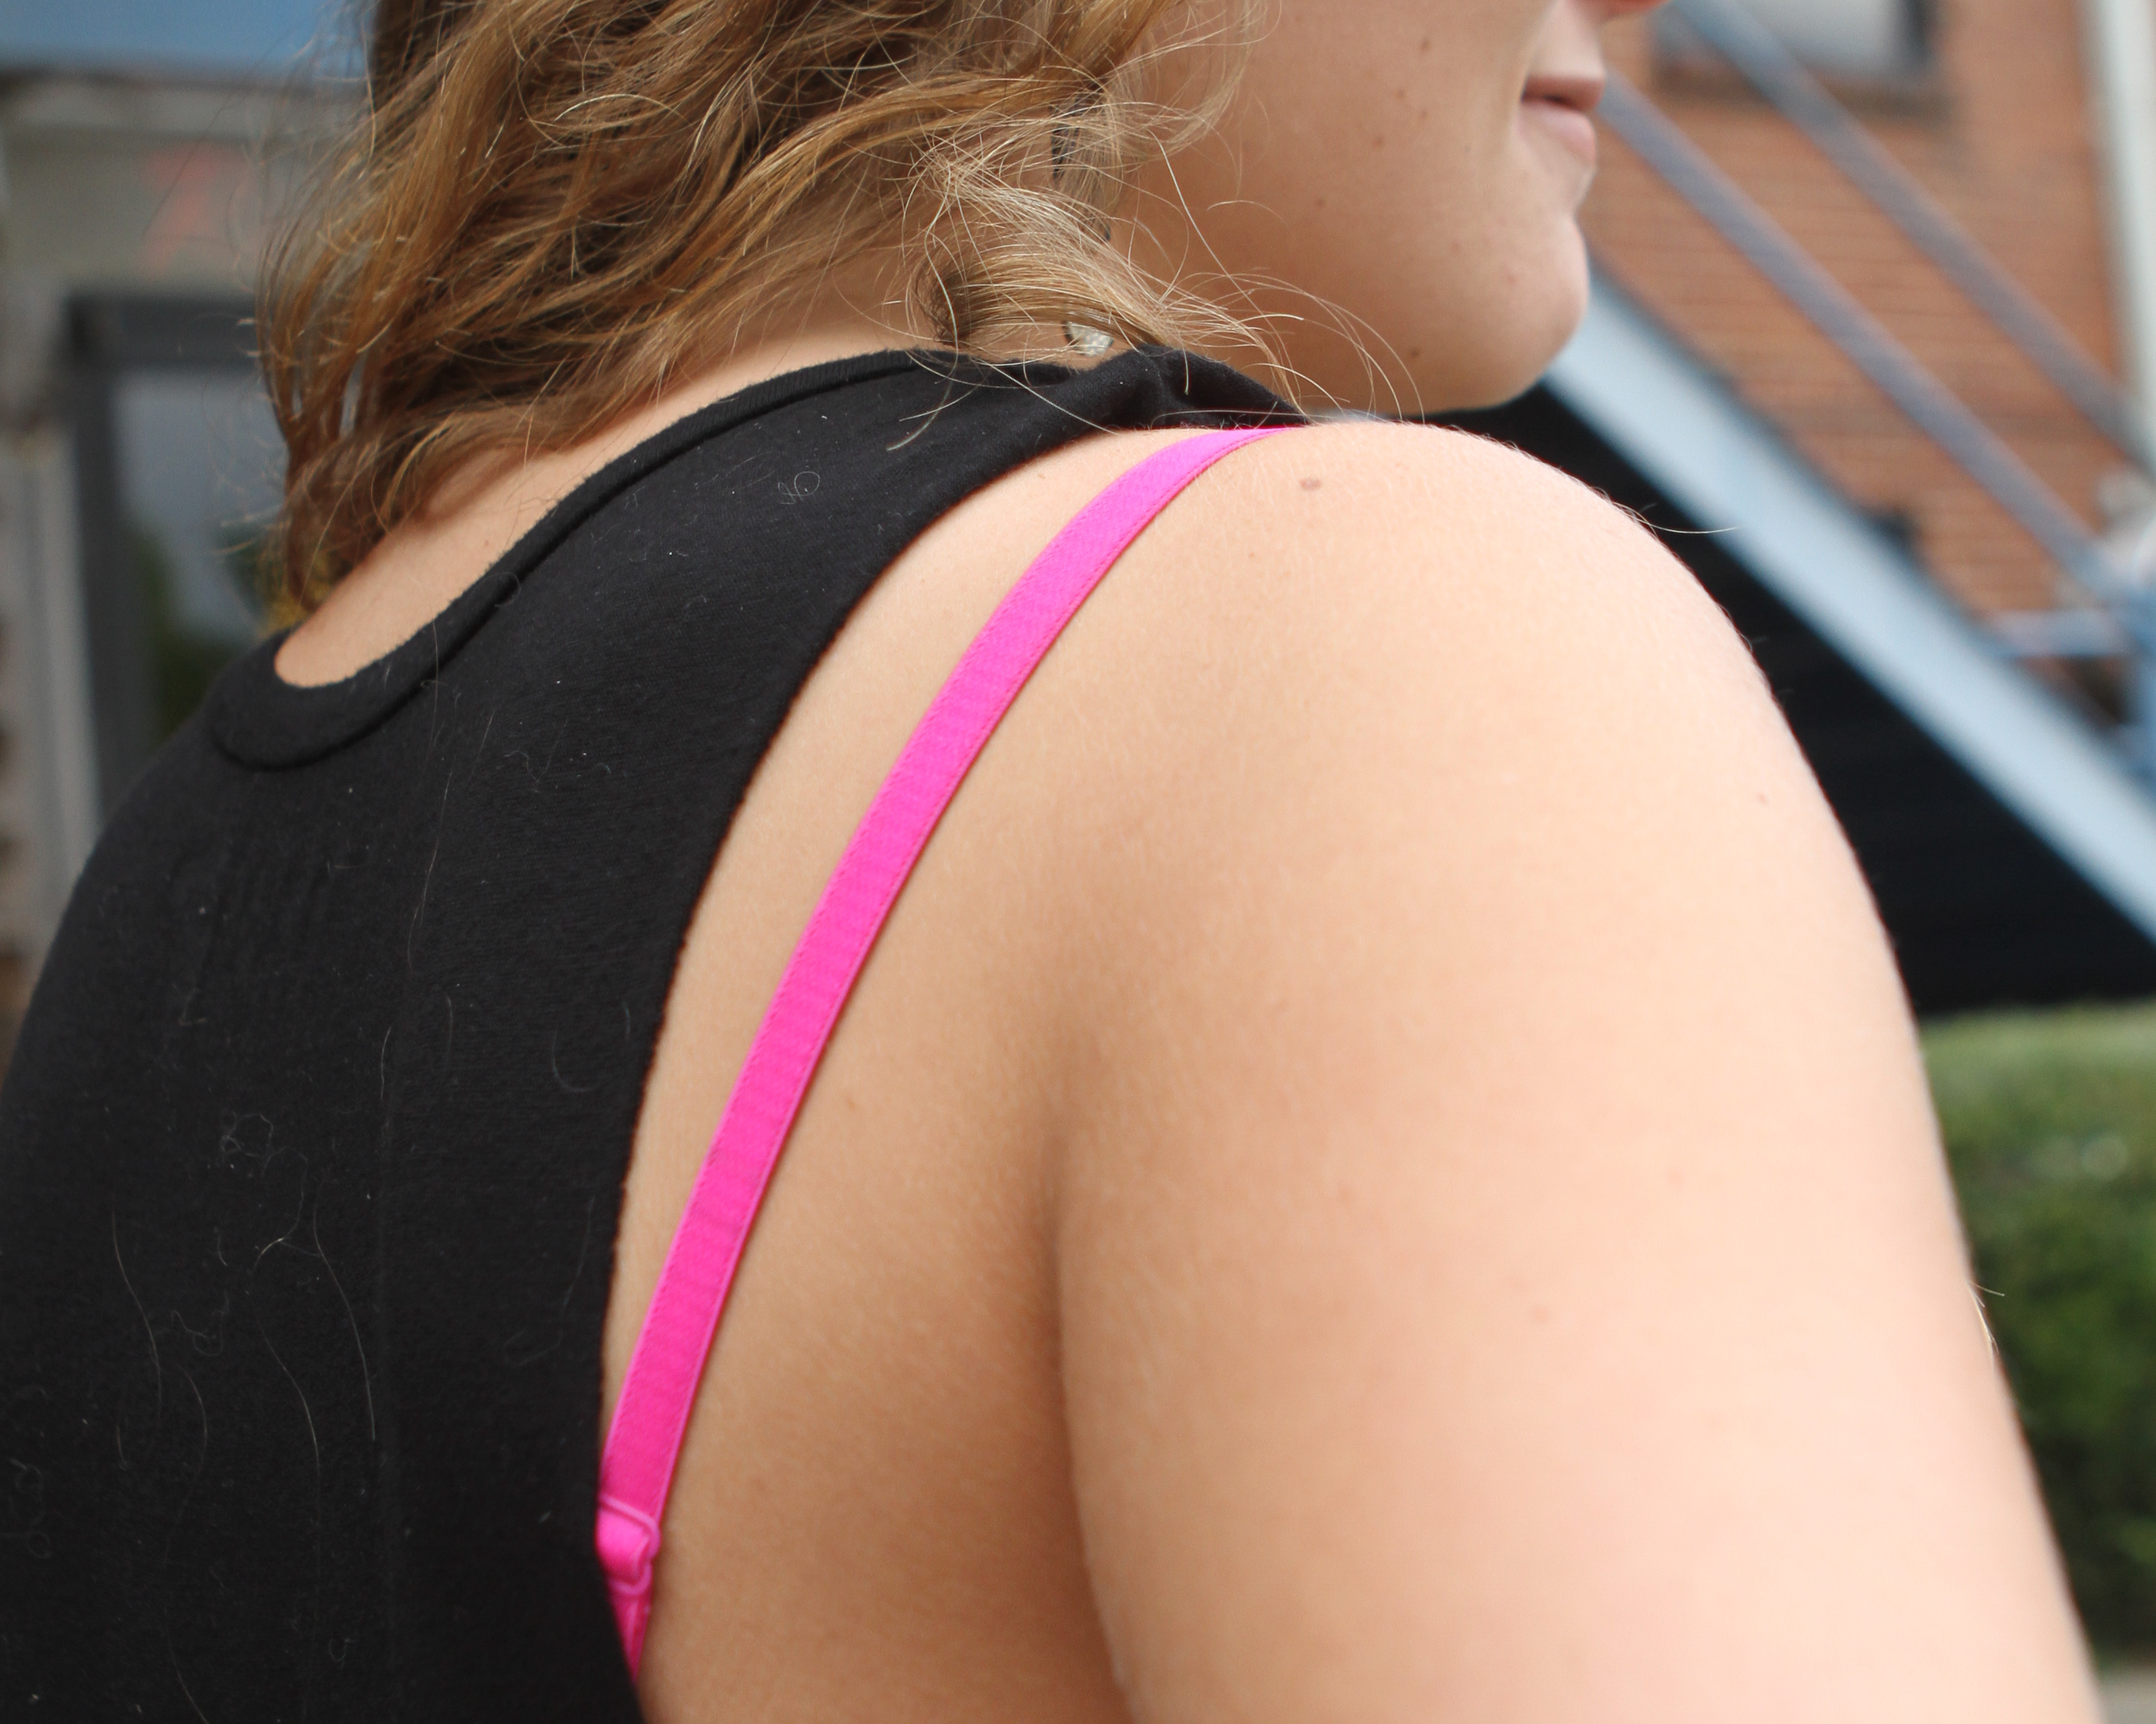 Exposed bra straps: Trendy or tacky?